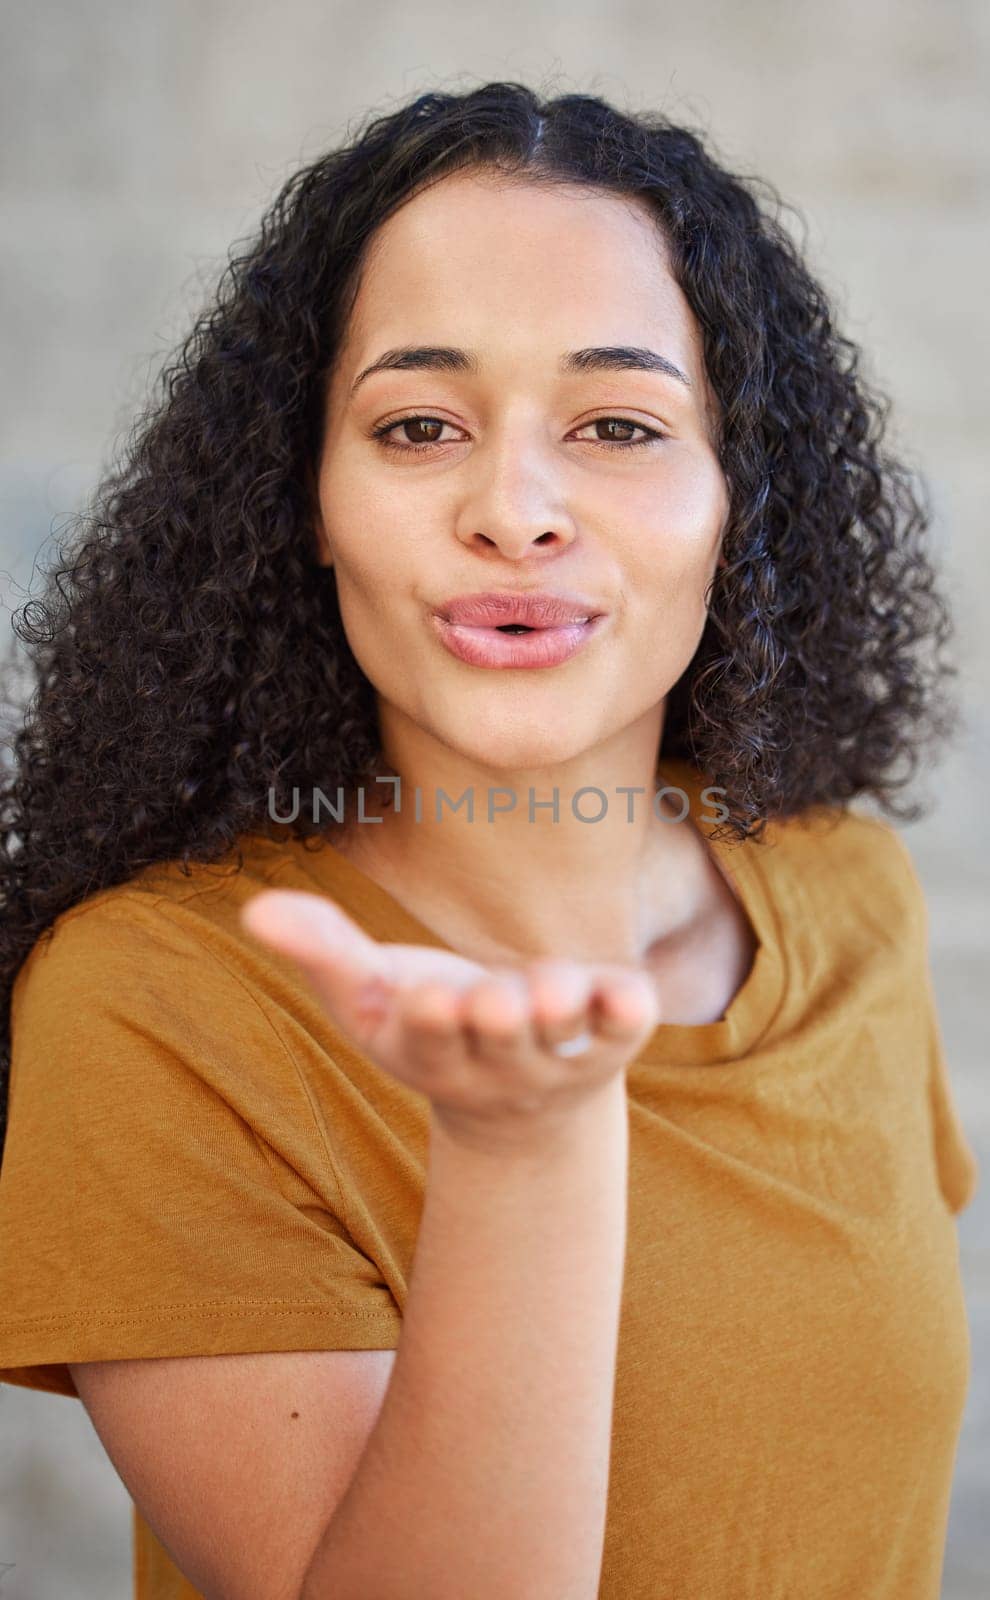 Woman, portrait and blowing a kiss for flirting, love and romance with cute gesture for relationship. Confidence, happy and emoji with lips or mouth, emotion and expression of feelings for affection by YuriArcurs